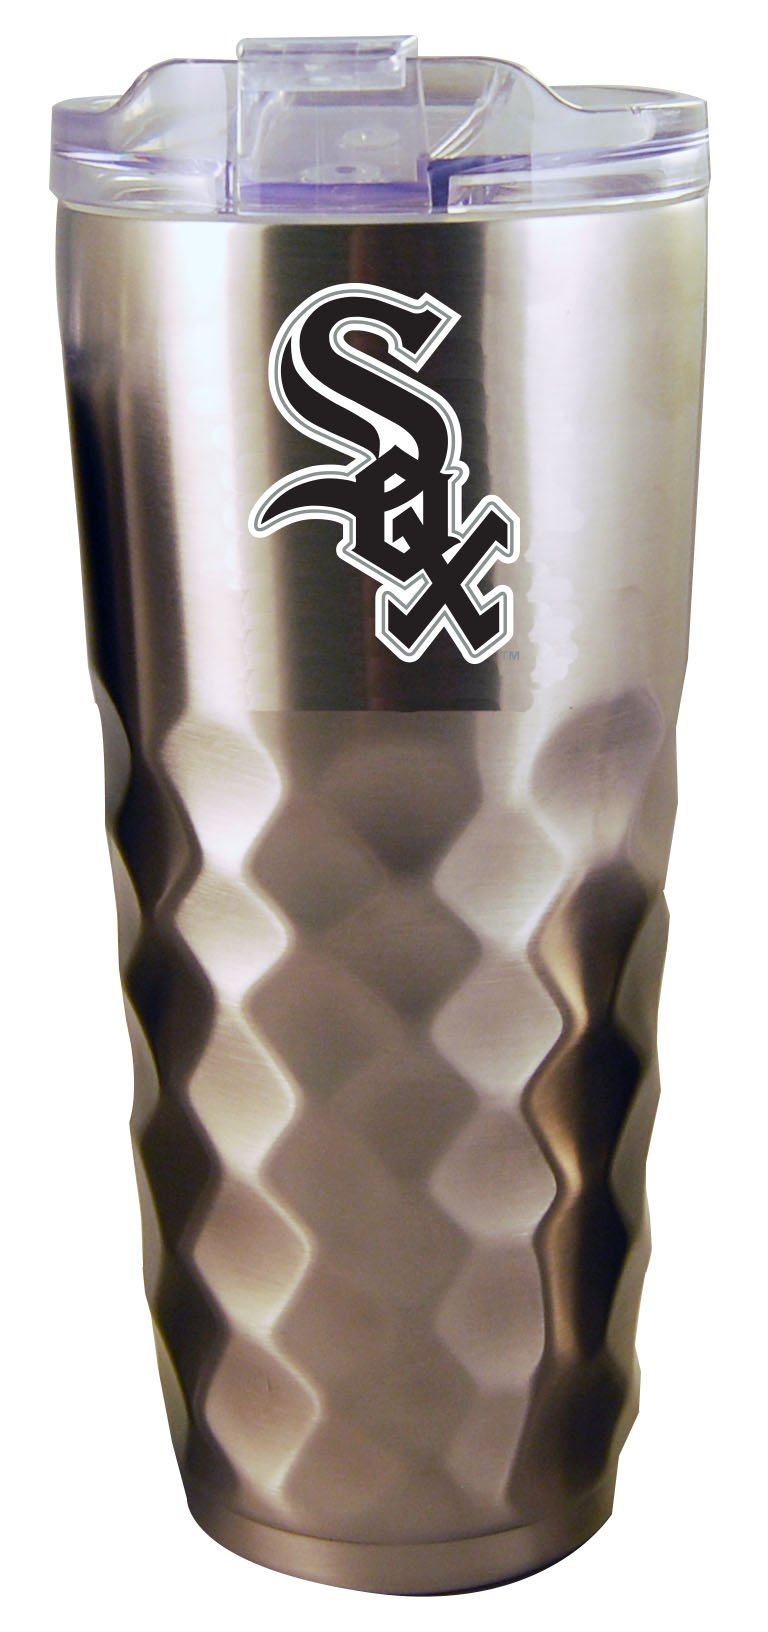 32OZ SS DIAMD TMBLR WHITE SOX
Chicago White Sox, CurrentProduct, CWS, Drinkware_category_All, MLB
The Memory Company